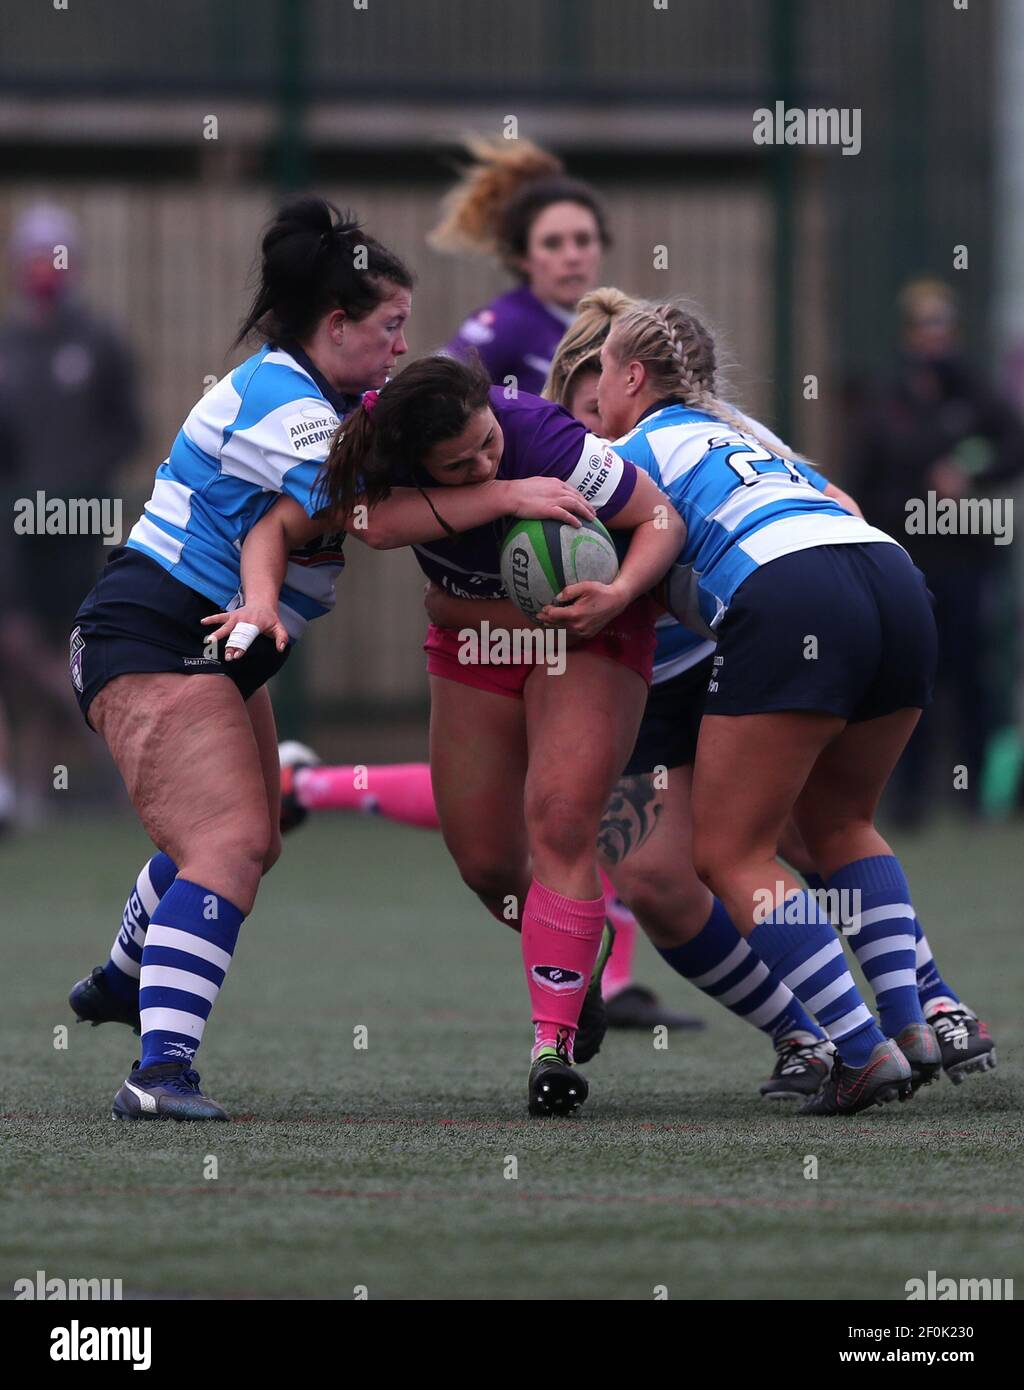 DURHAM CITY, ENGLAND. MARCH 6TH: Sam Herrick and Sophie Dowson of Darlington Mowden Park Sharks and Katie Trevarthen of Loughborough Lightning during the WOMEN'S ALLIANZ PREMIER 15S match between DMP Durham Sharks and Loughborough Ligntning at Maiden Castle, Durham City on Saturday 6th March 2021. (Credit: Chris Booth | MI News) Credit: MI News & Sport /Alamy Live News Stock Photo